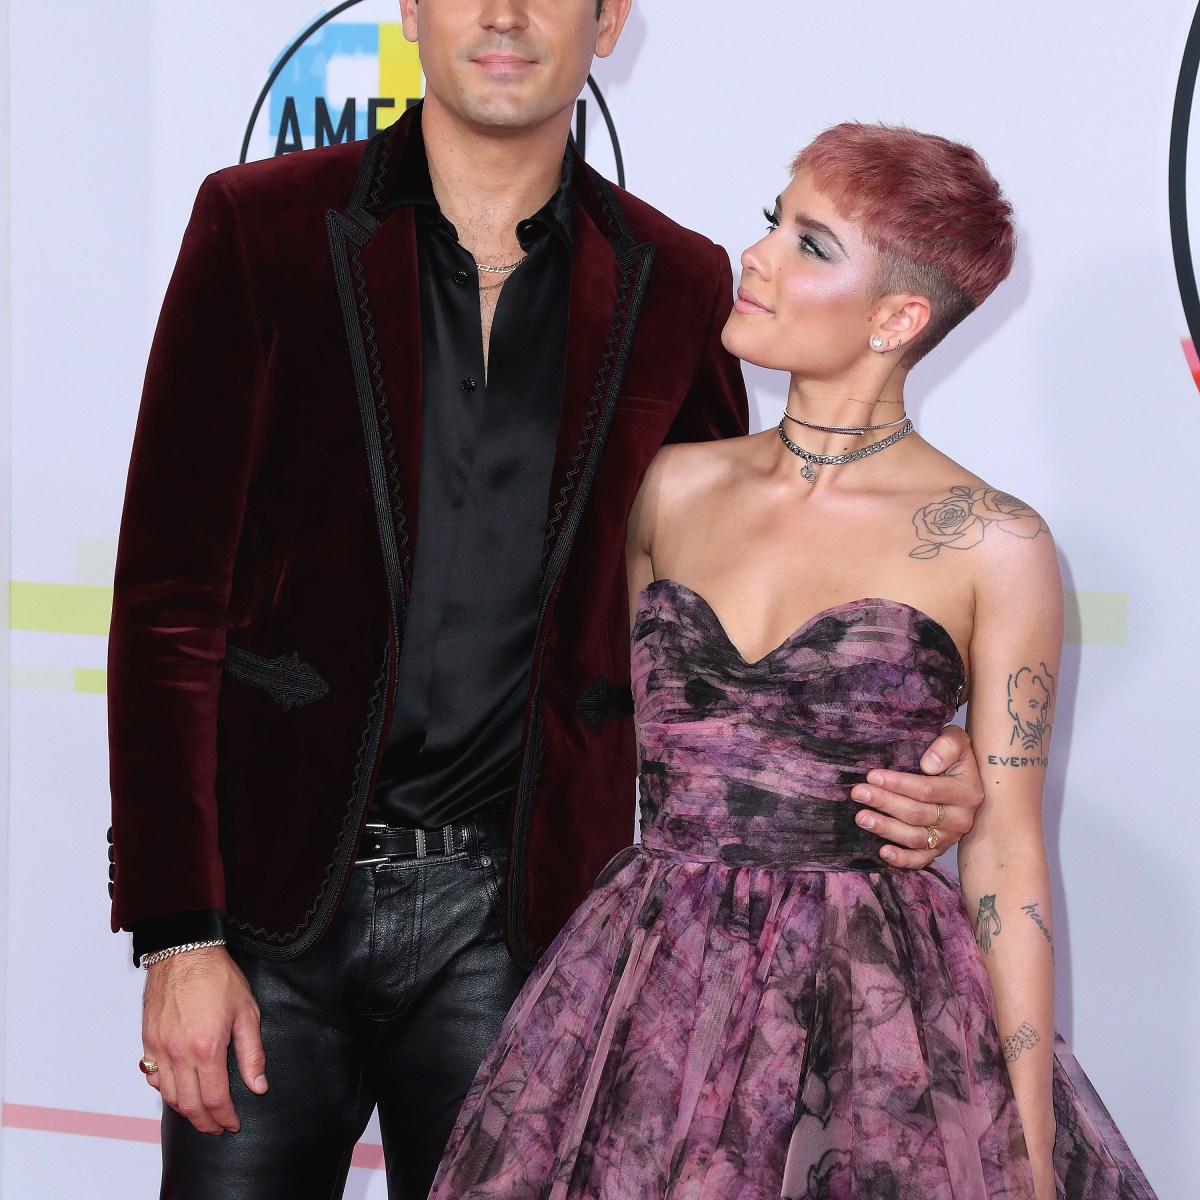 Who Has Halsey Dated See The Singer S Exes And Relationship History The singer certainly seems to have a type. https www lifeandstylemag com posts who has halsey dated see the singers exes and relationship history